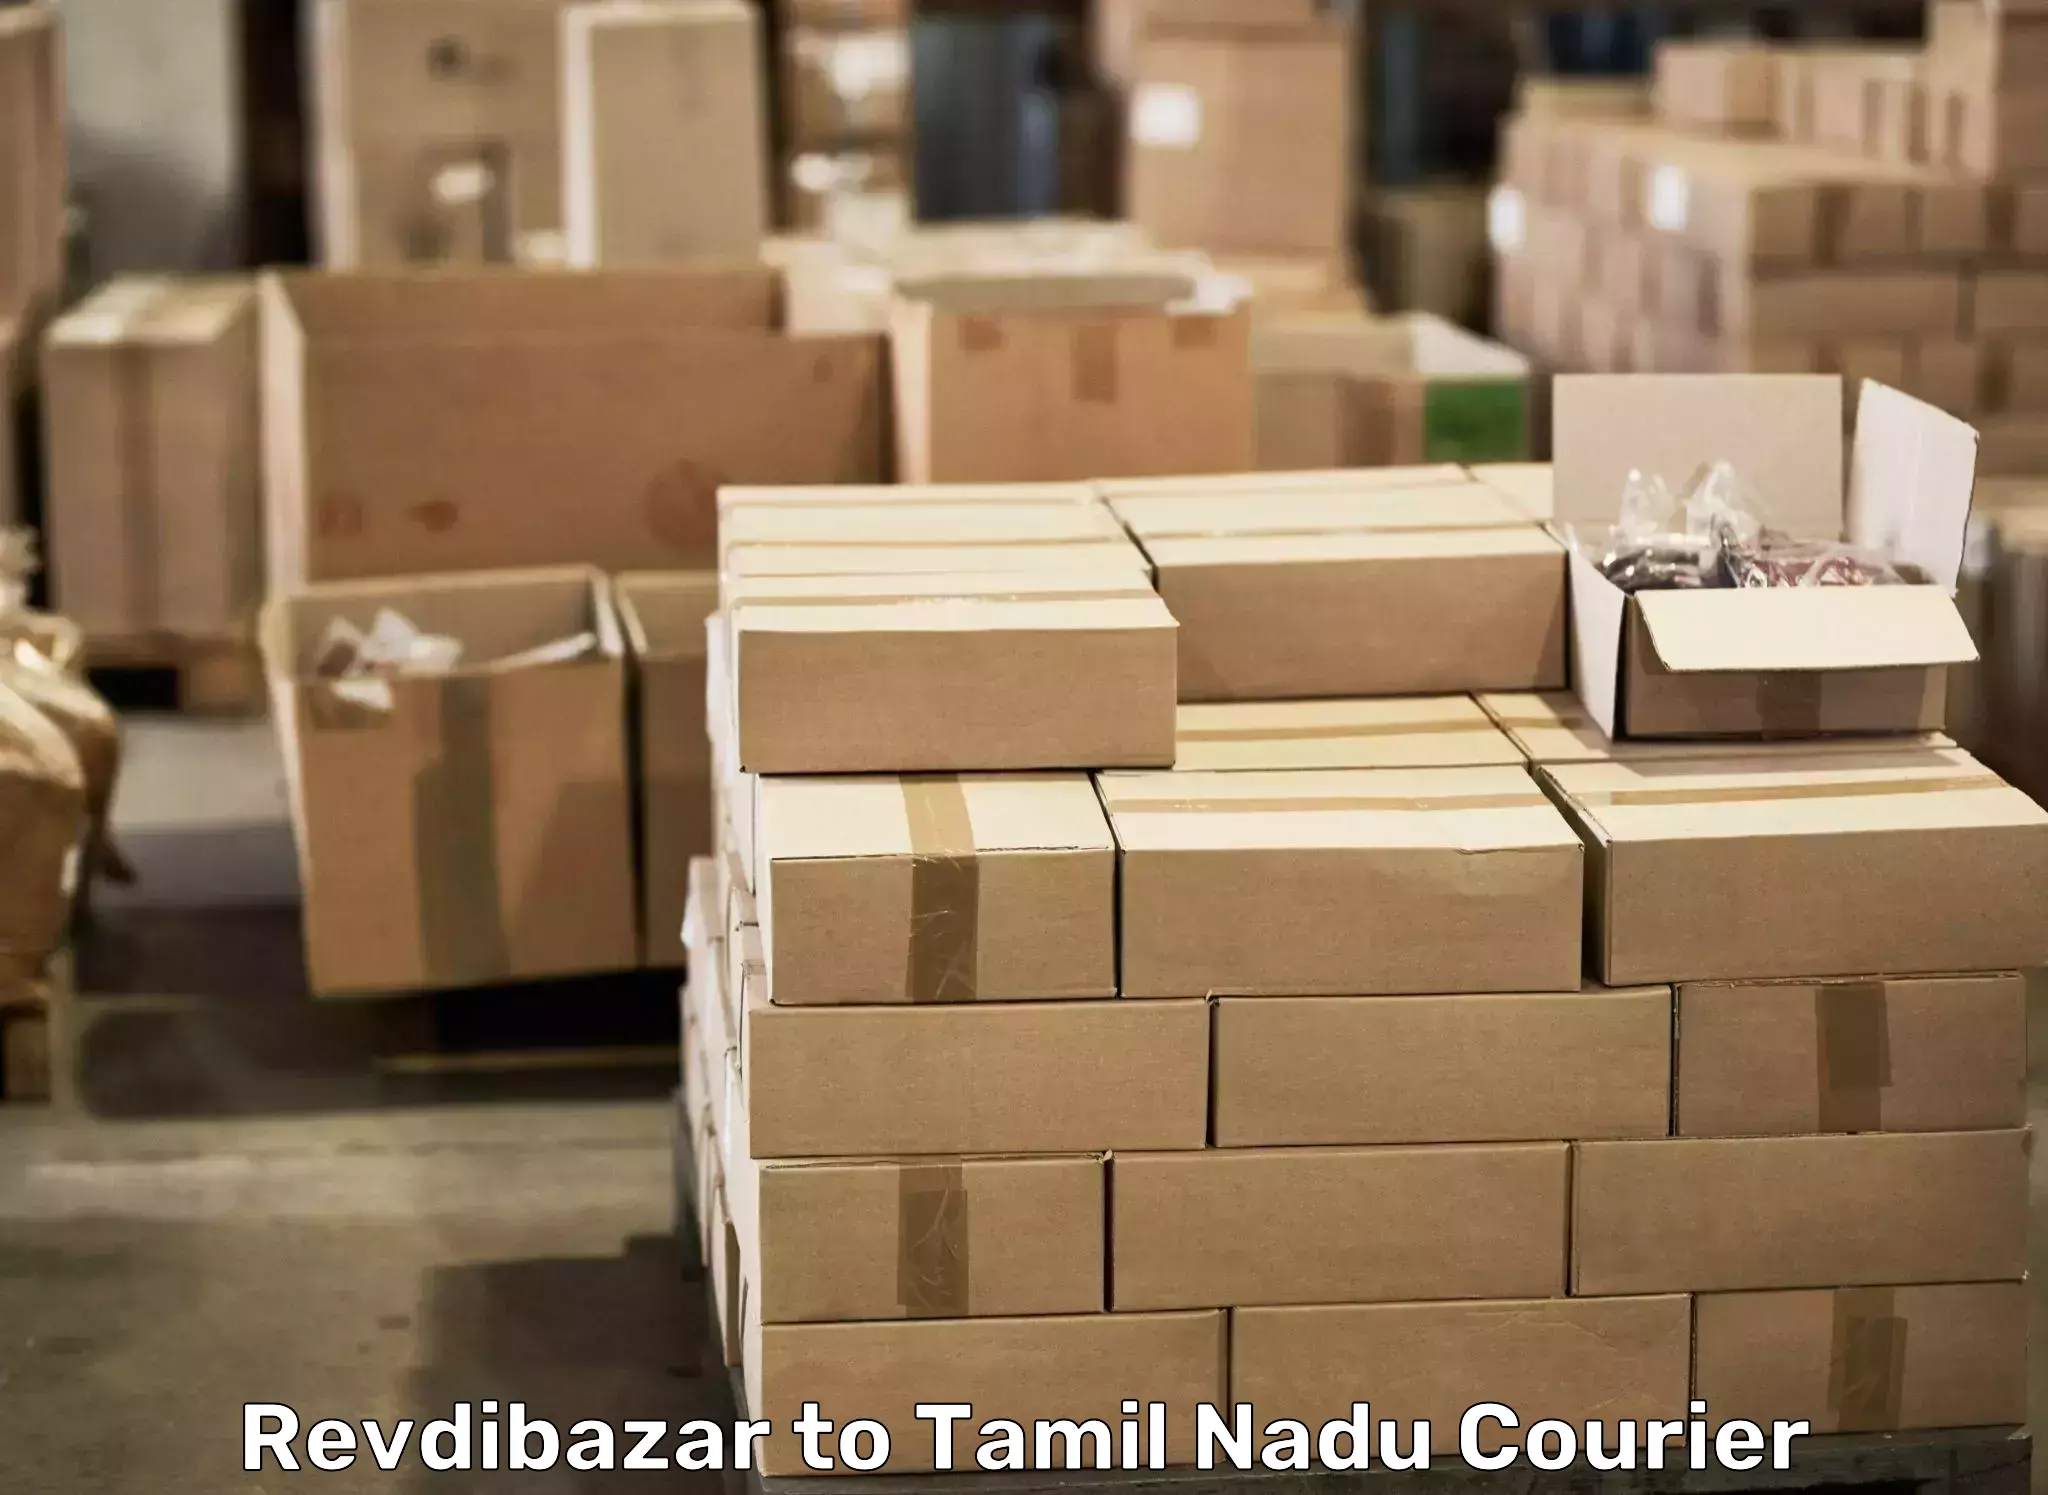 Quality furniture transport Revdibazar to Meenakshi Academy of Higher Education and Research Chennai